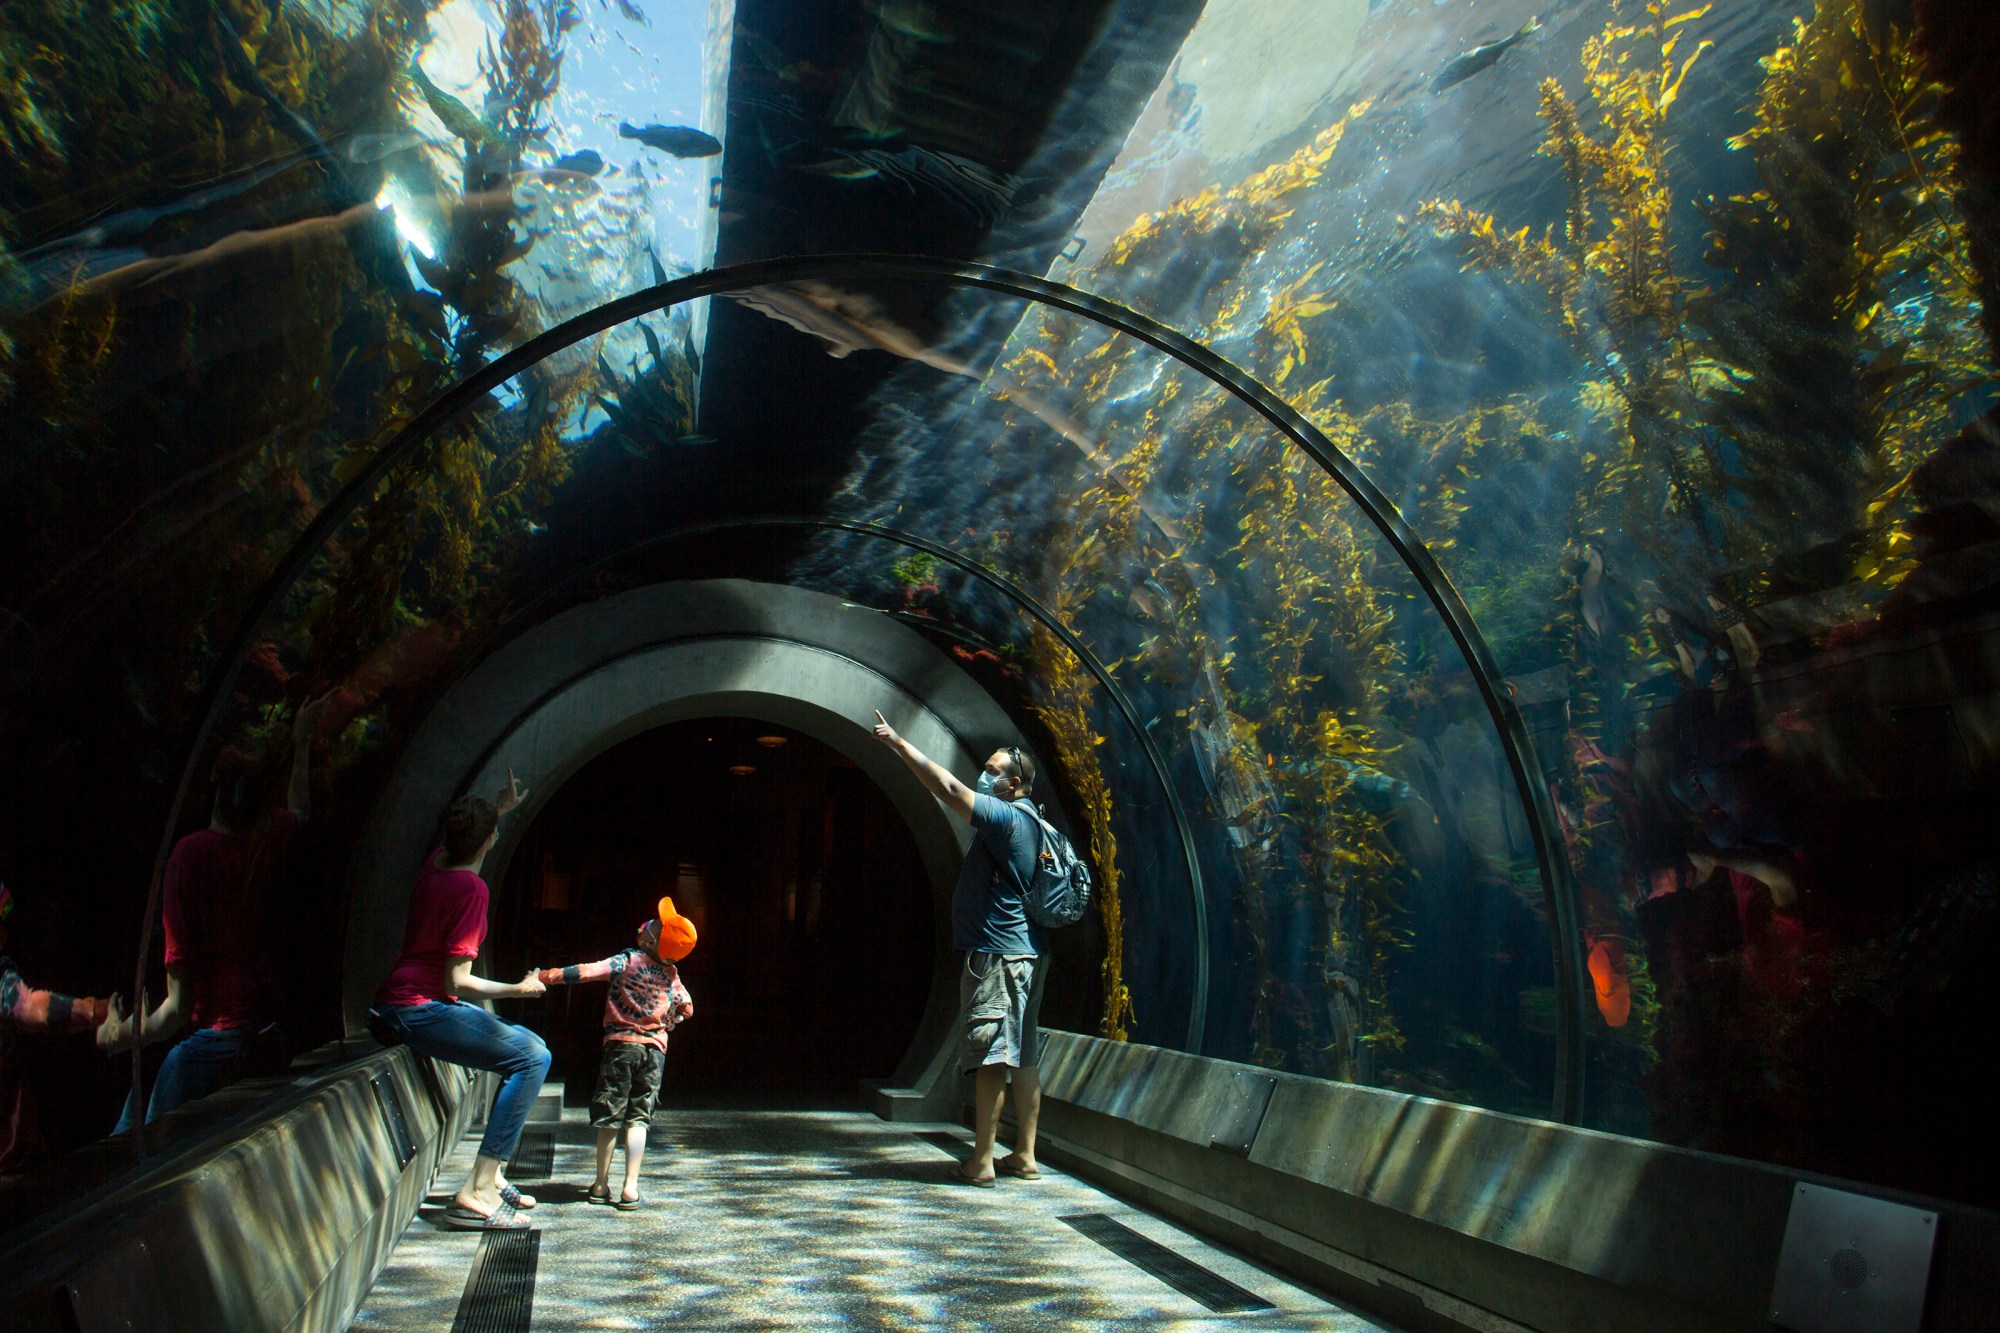 From left, Emily Senac, three-year-old Jordan Senac and Jason Senac admire the Kelp Forest exhibit at the California Science Center during its first day open since shutting down due to Covid-19 restrictions in Los Angeles on Saturday, March 27, 2021. (Photo by Drew A. Kelley, Contributing Photographer)